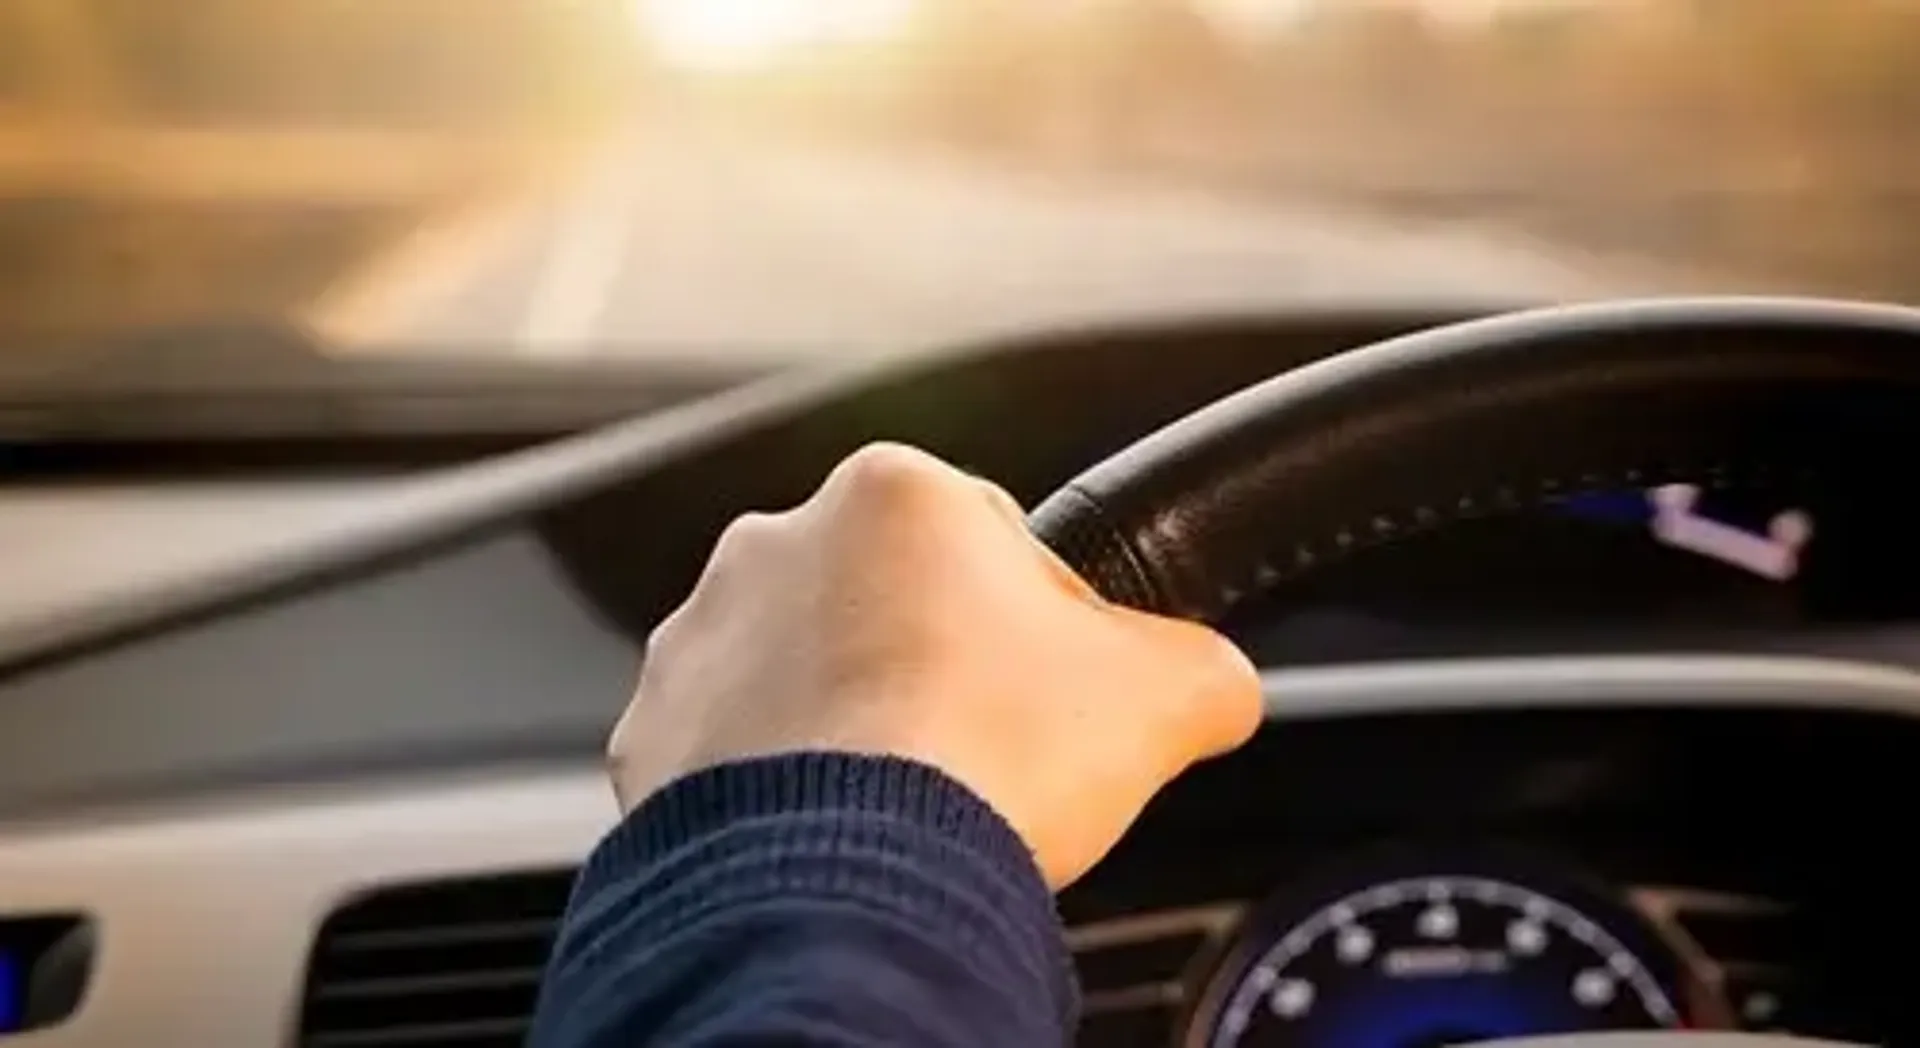 A person driving a car with one hand on the steering wheel, focused on the road ahead.